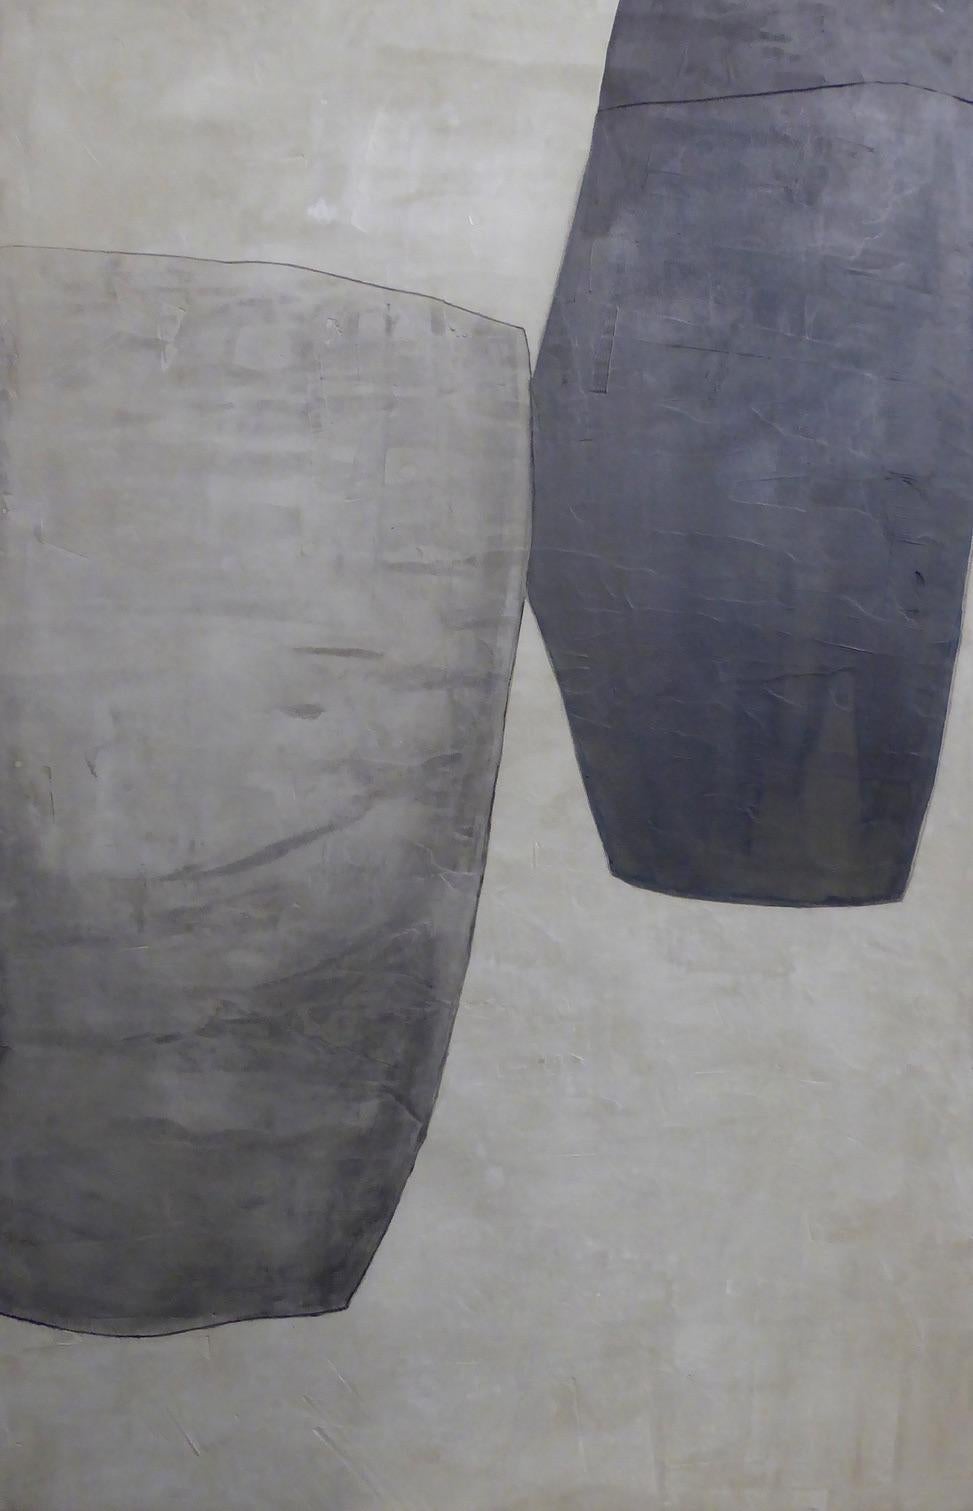 Formes Suspeses - 21st Century, Abstract Art, Cement on Wood, Earth Tones